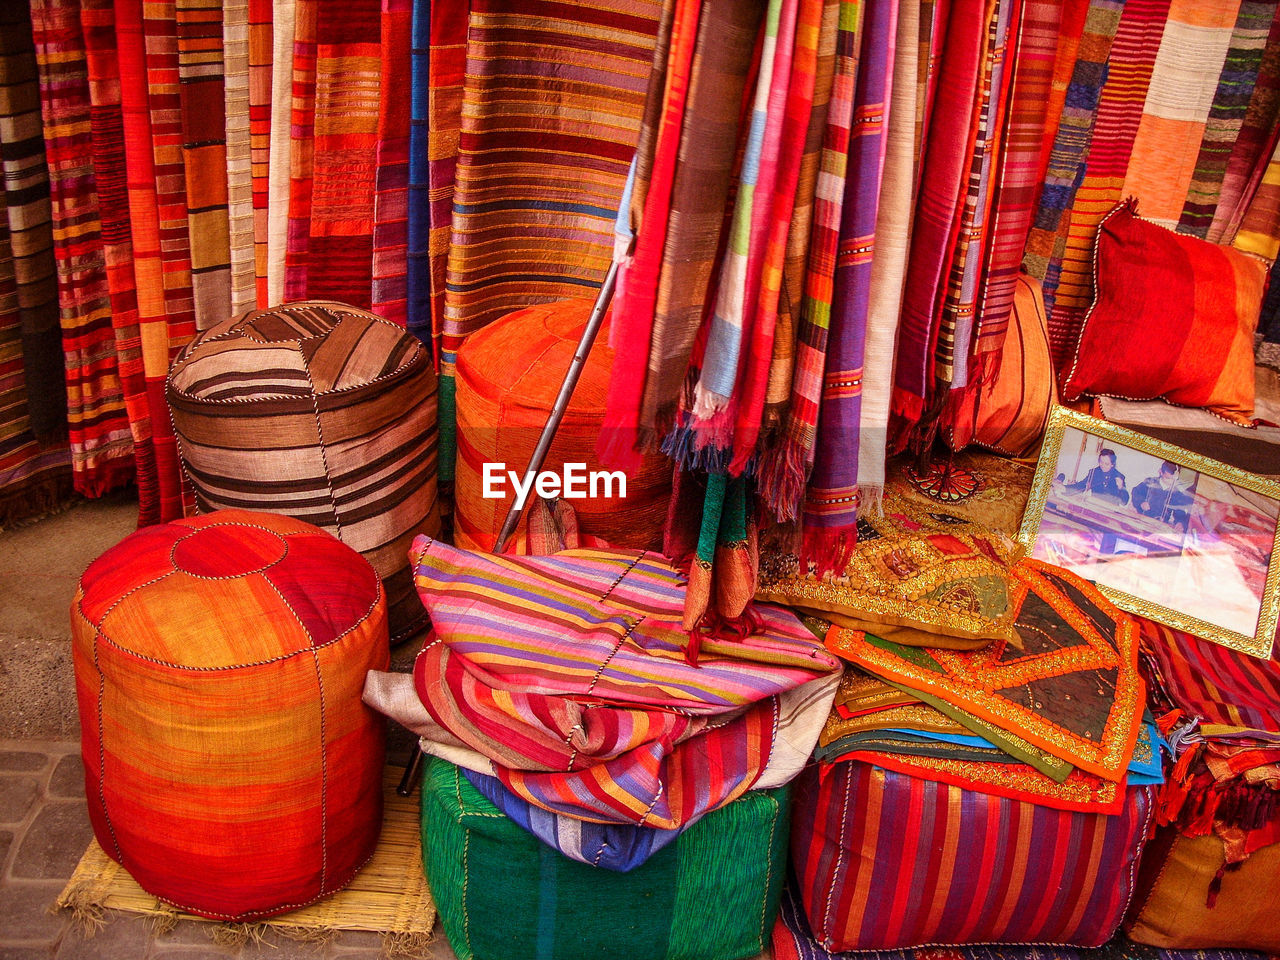 Colorful textiles for sale at market stall